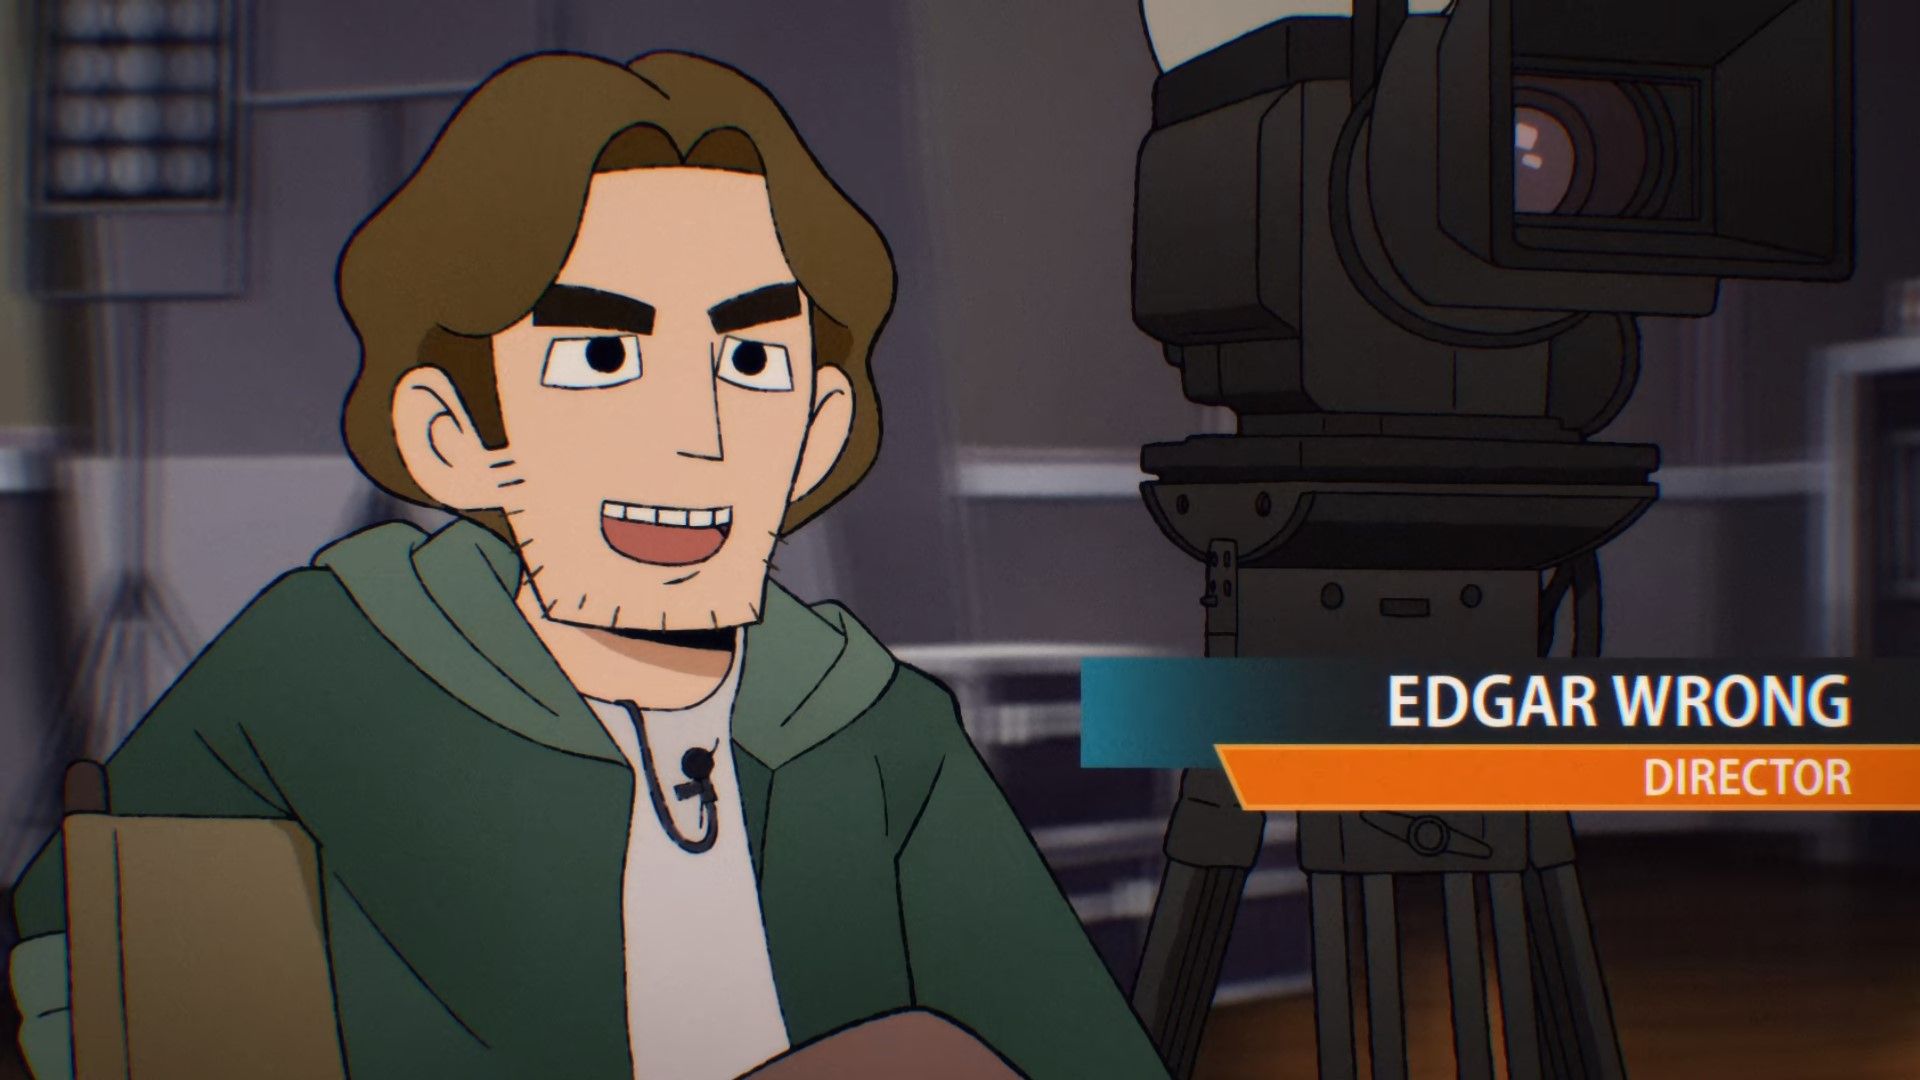 Screenshot from Netflix's Scott Pilgrim Takes Off episode 5 shows director of in-series movie named Edgar Wrong.